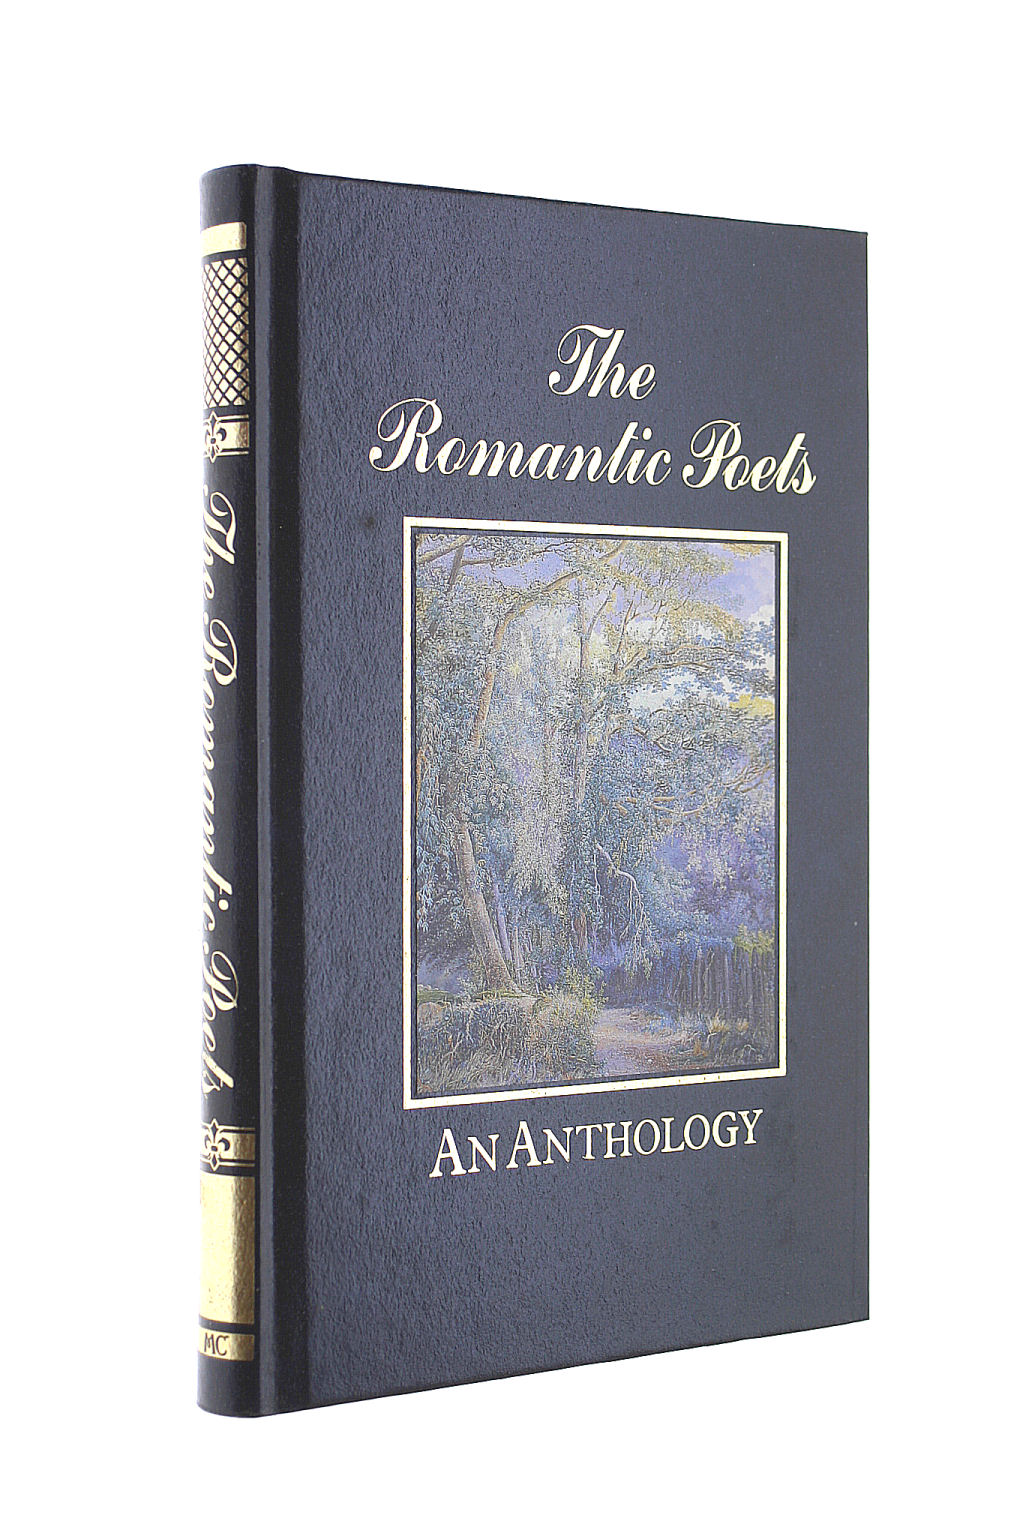 VARIOUS - The Romantic Poets: An Anthology (The great writers library)